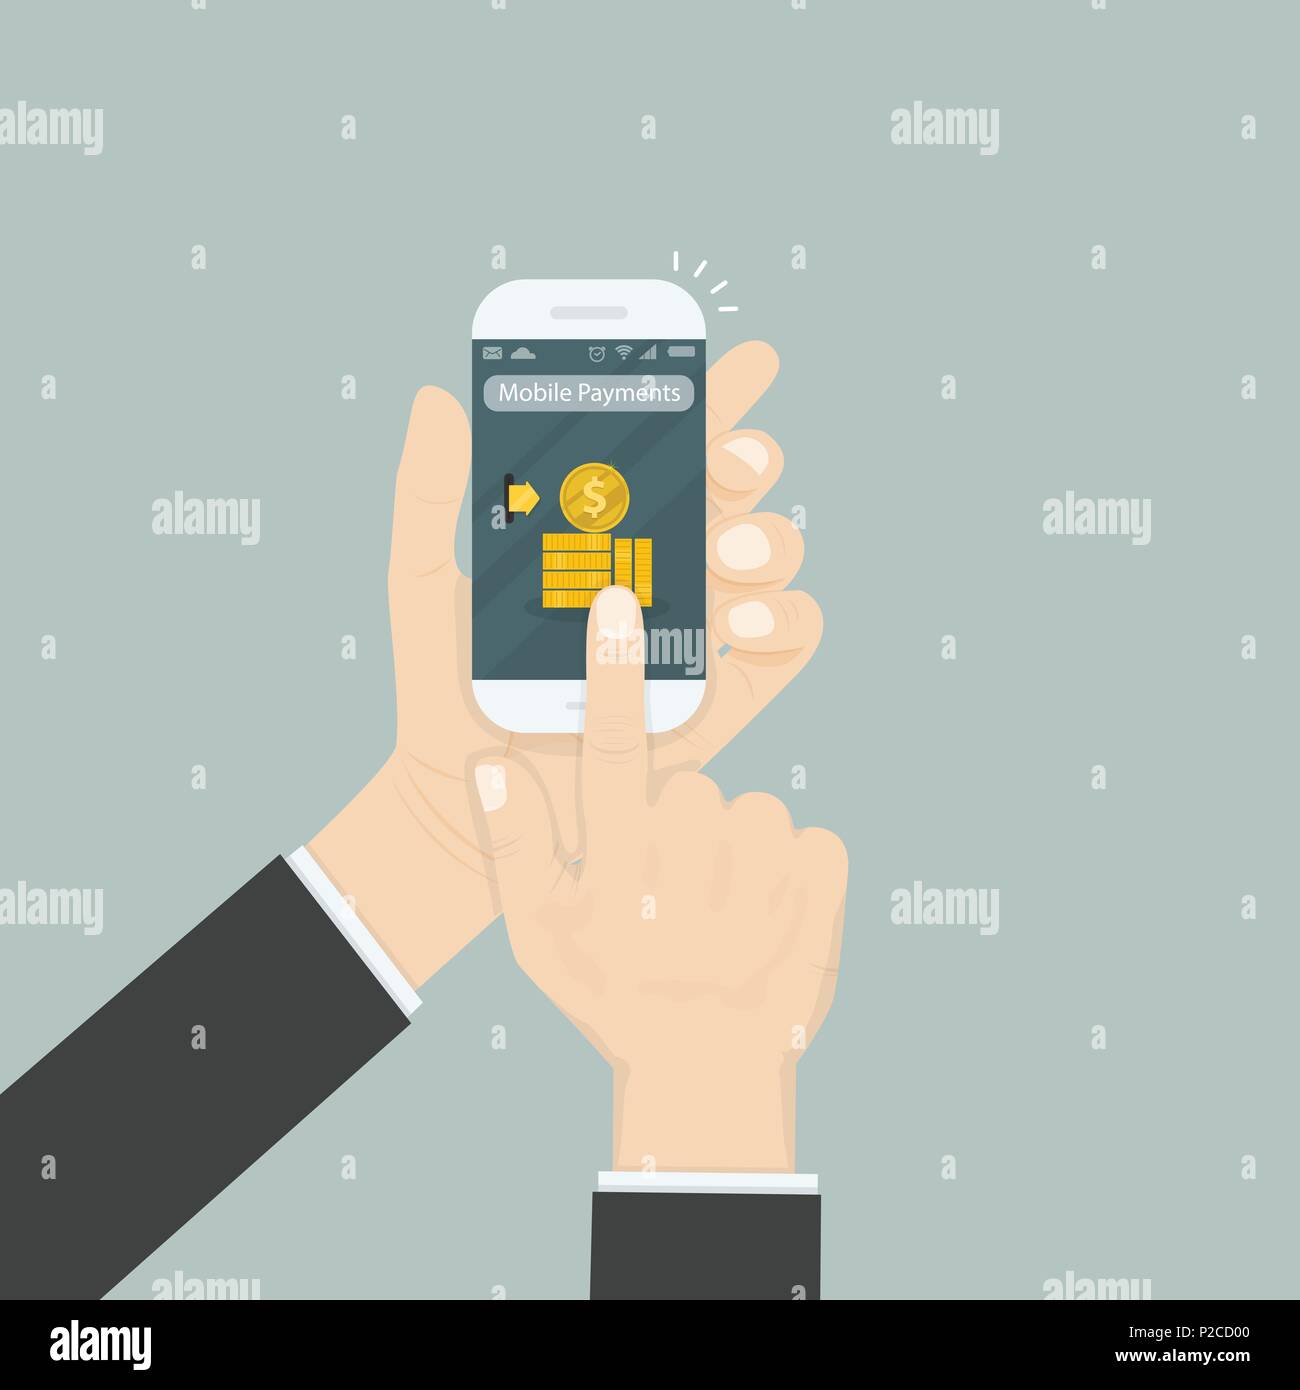 Hand holding smartphone and touching screen with text messaging.Smartphone with Mobile Payments applications on screen.Mobile Application concepts.Sma Stock Vector